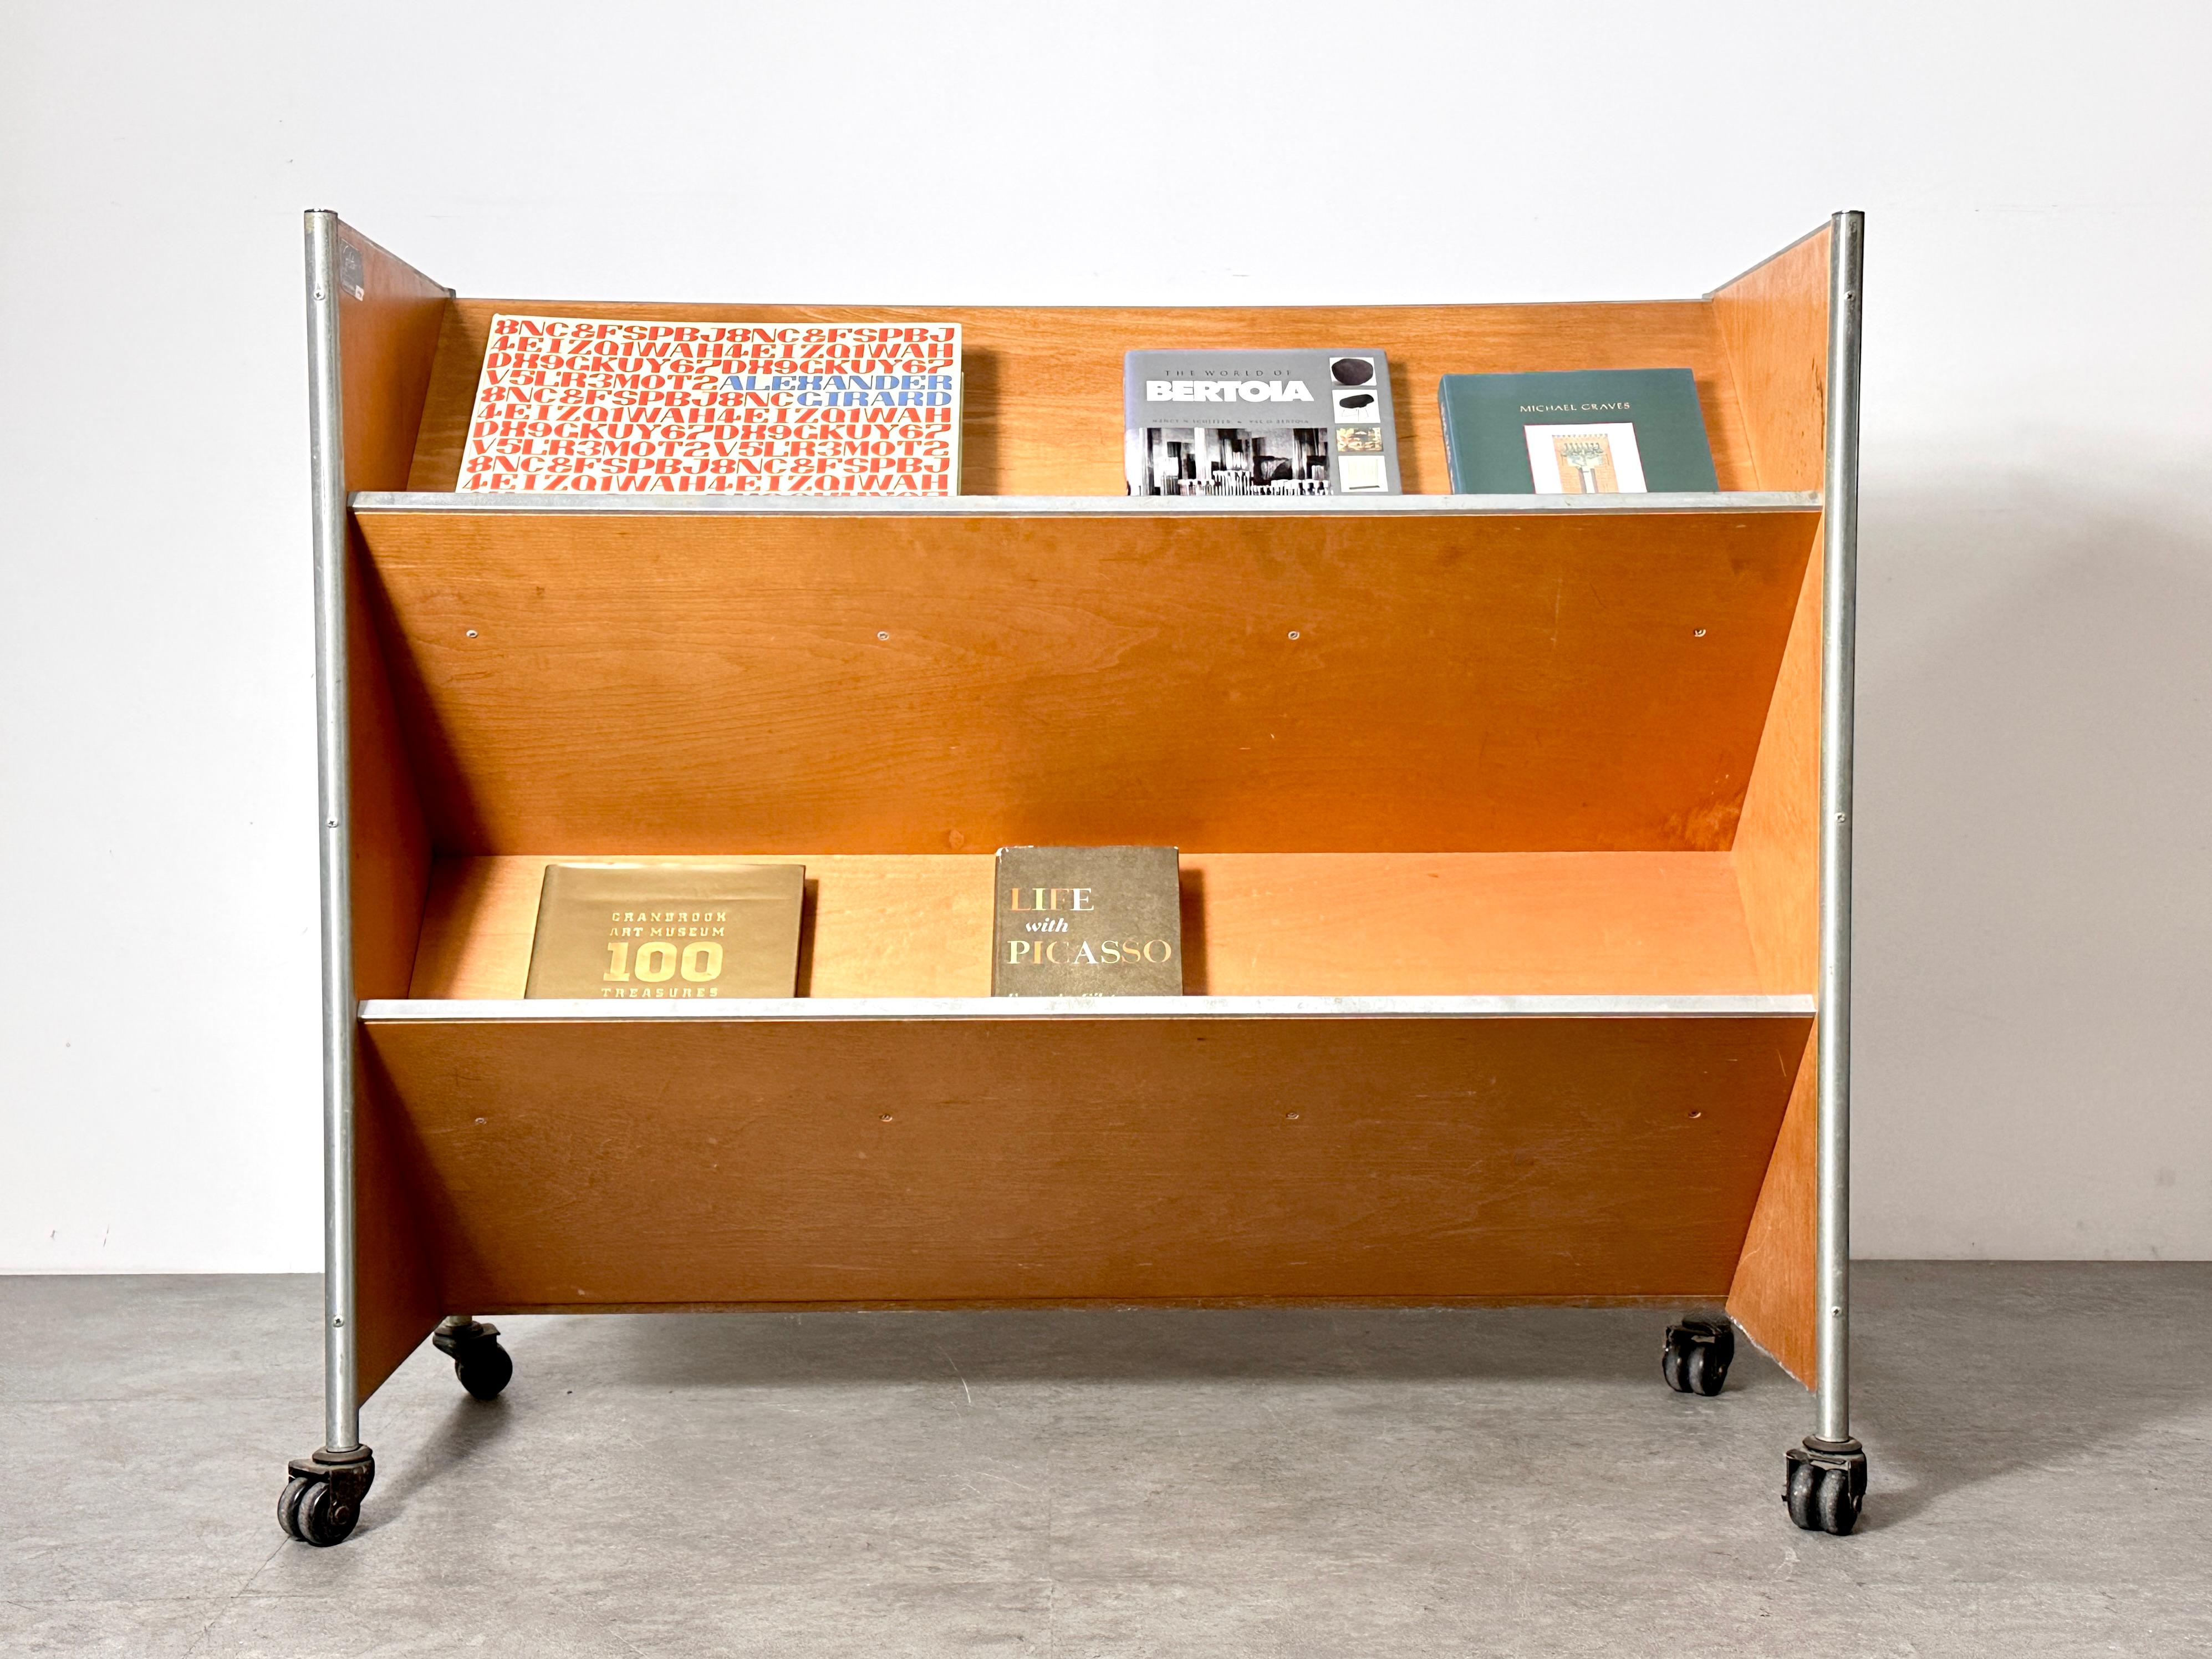 Industrial book truck designed by Henry P Glass for Fleetwood circa 1950s
Architectural design features dual sided slanted shelving in birch with a tubular steel frame
Original label intact
